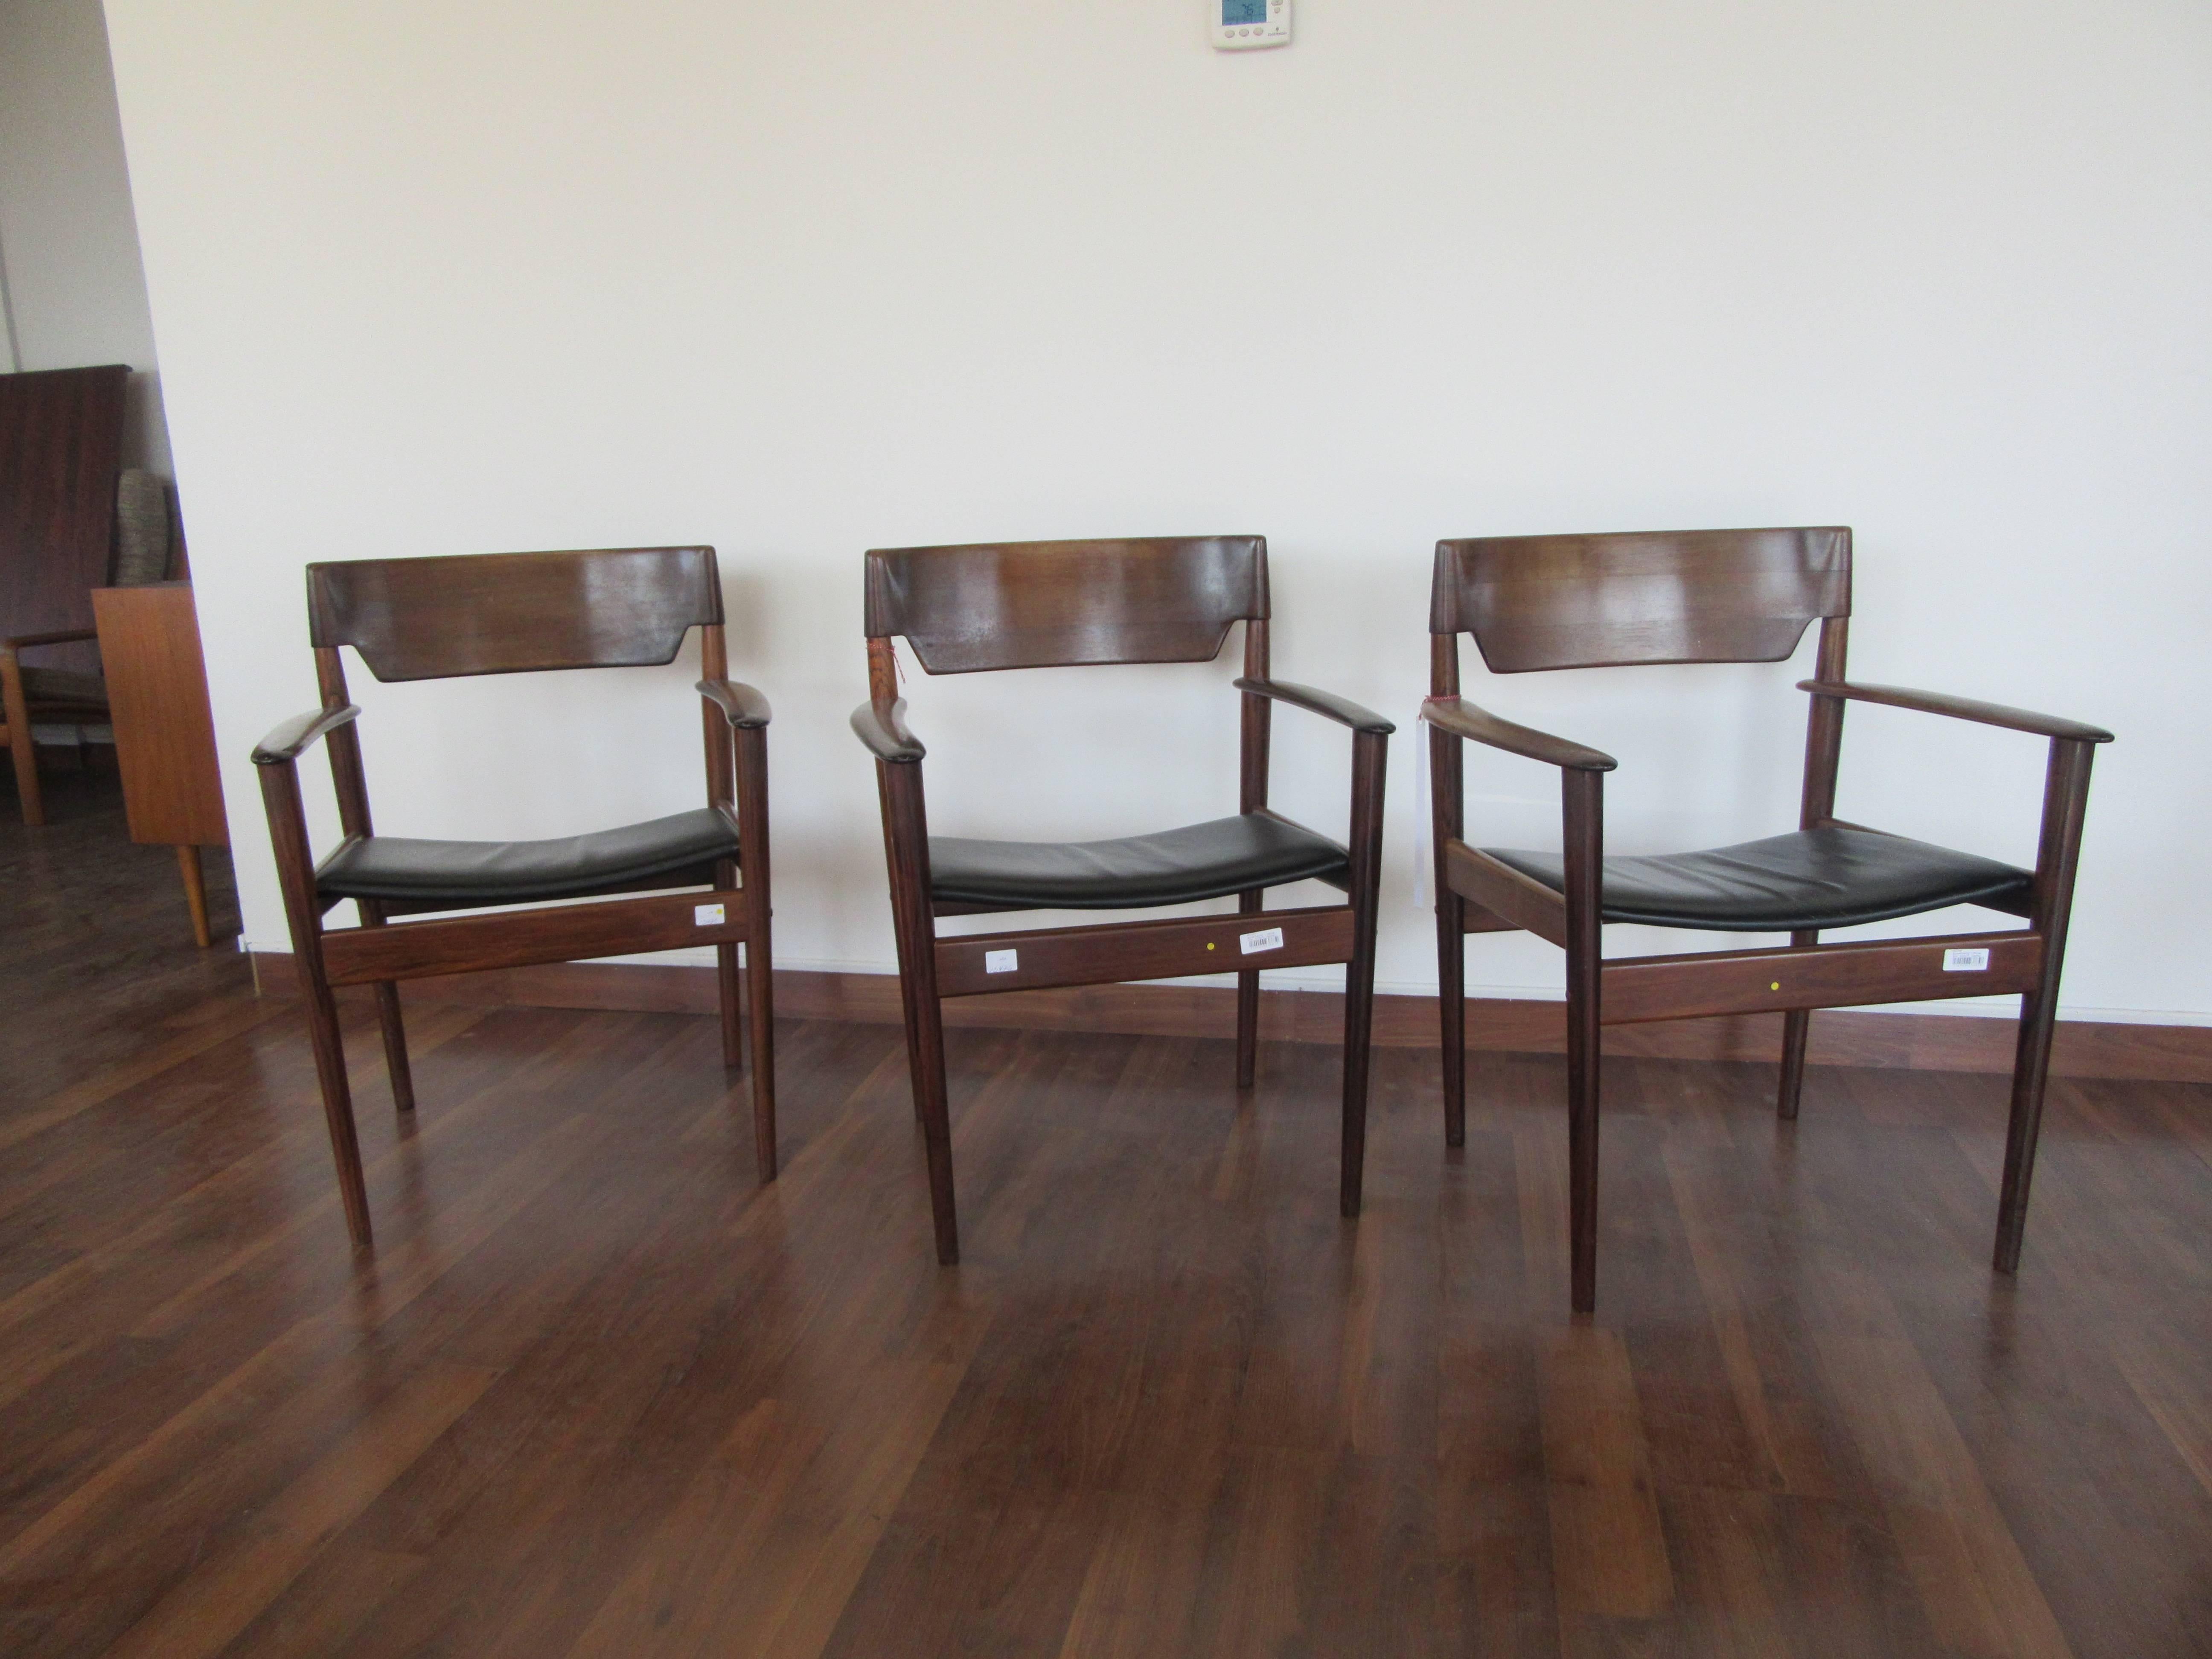 Rosewood armchairs by Grete Jalk with leather upholstery.